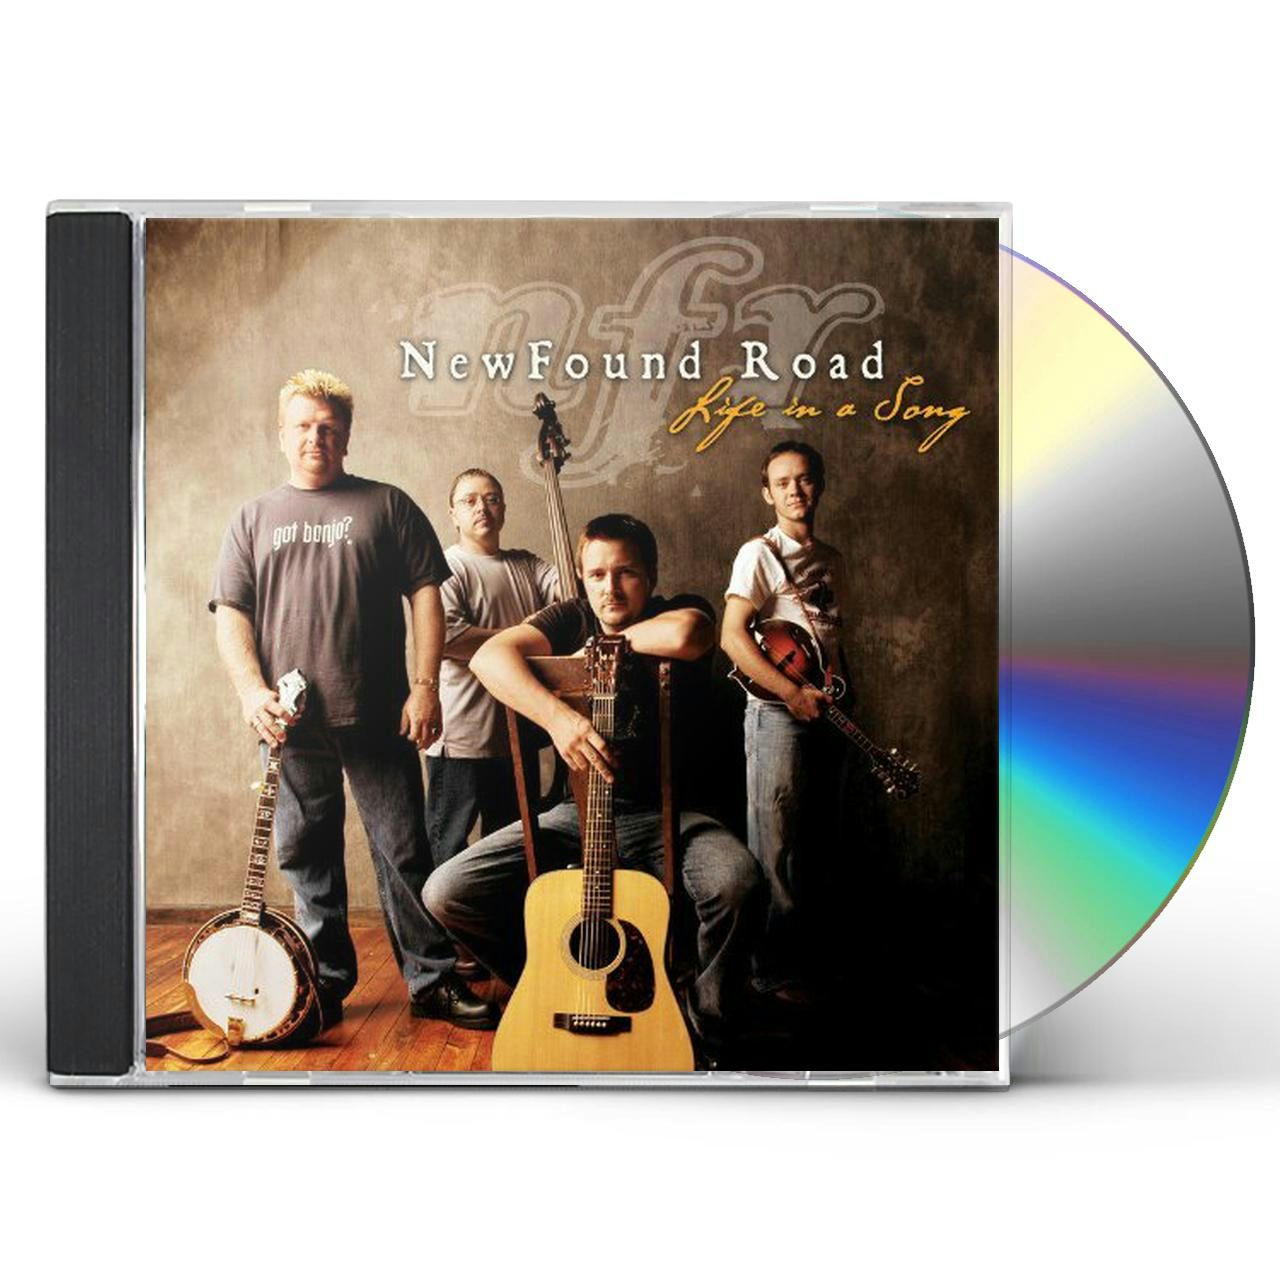 Newfound Road LIFE IN A SONG CD